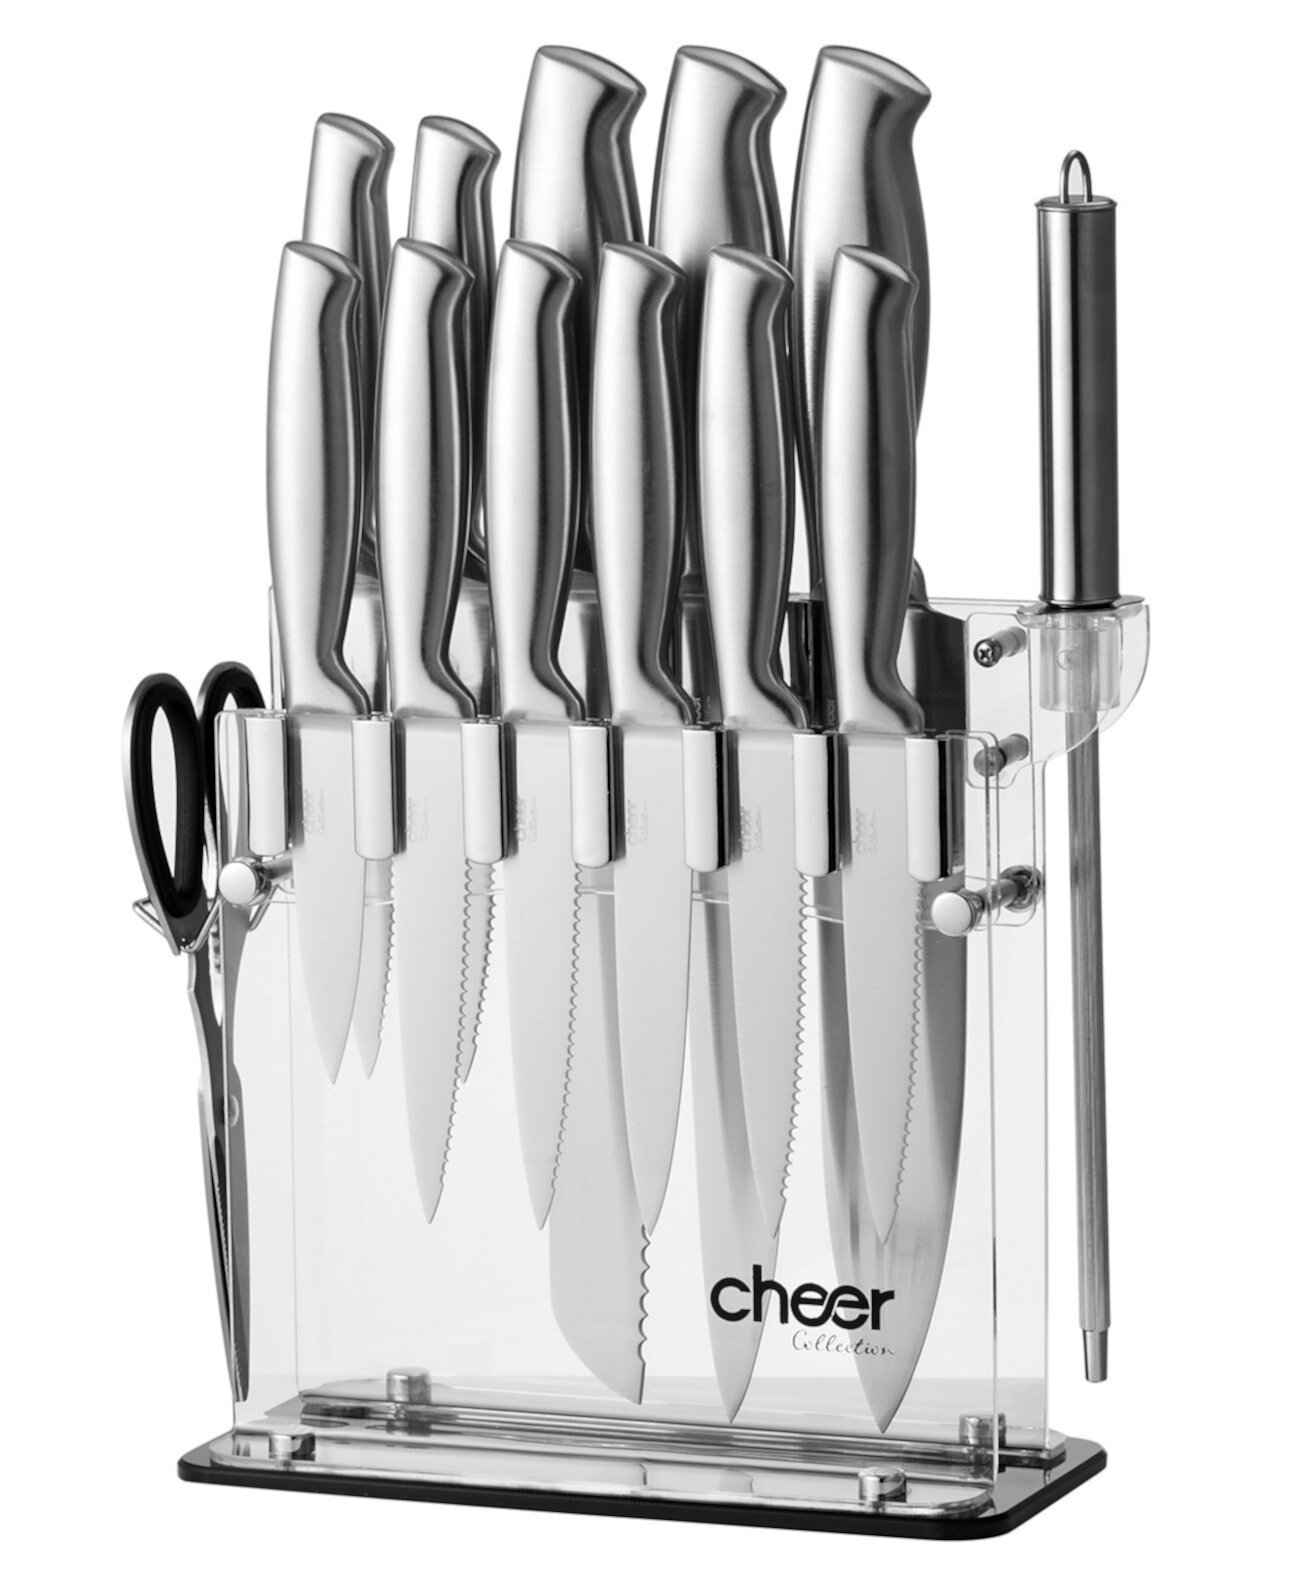 Stainless Steel Chef Knife Set with Acrylic Stand 14-Piece Cheer Collection